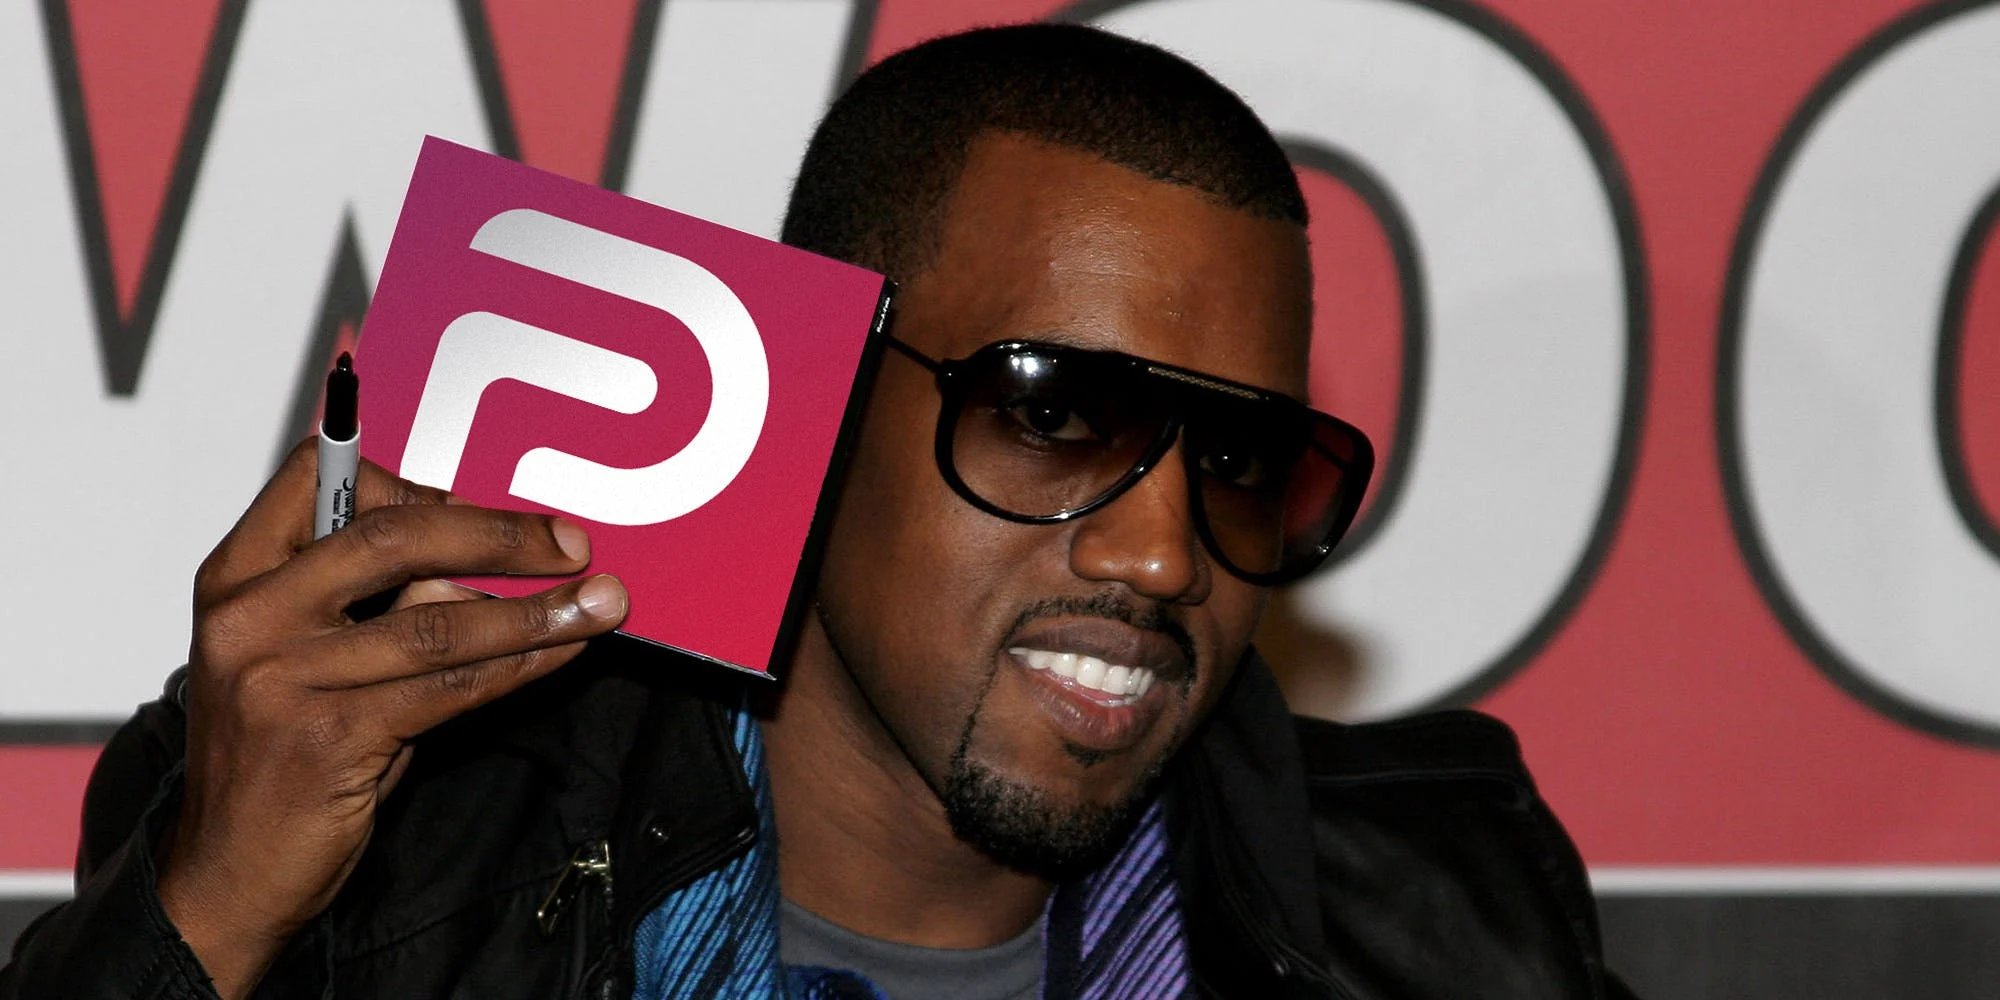 Kanye West Accepts to Purchase the Social Media App Parler